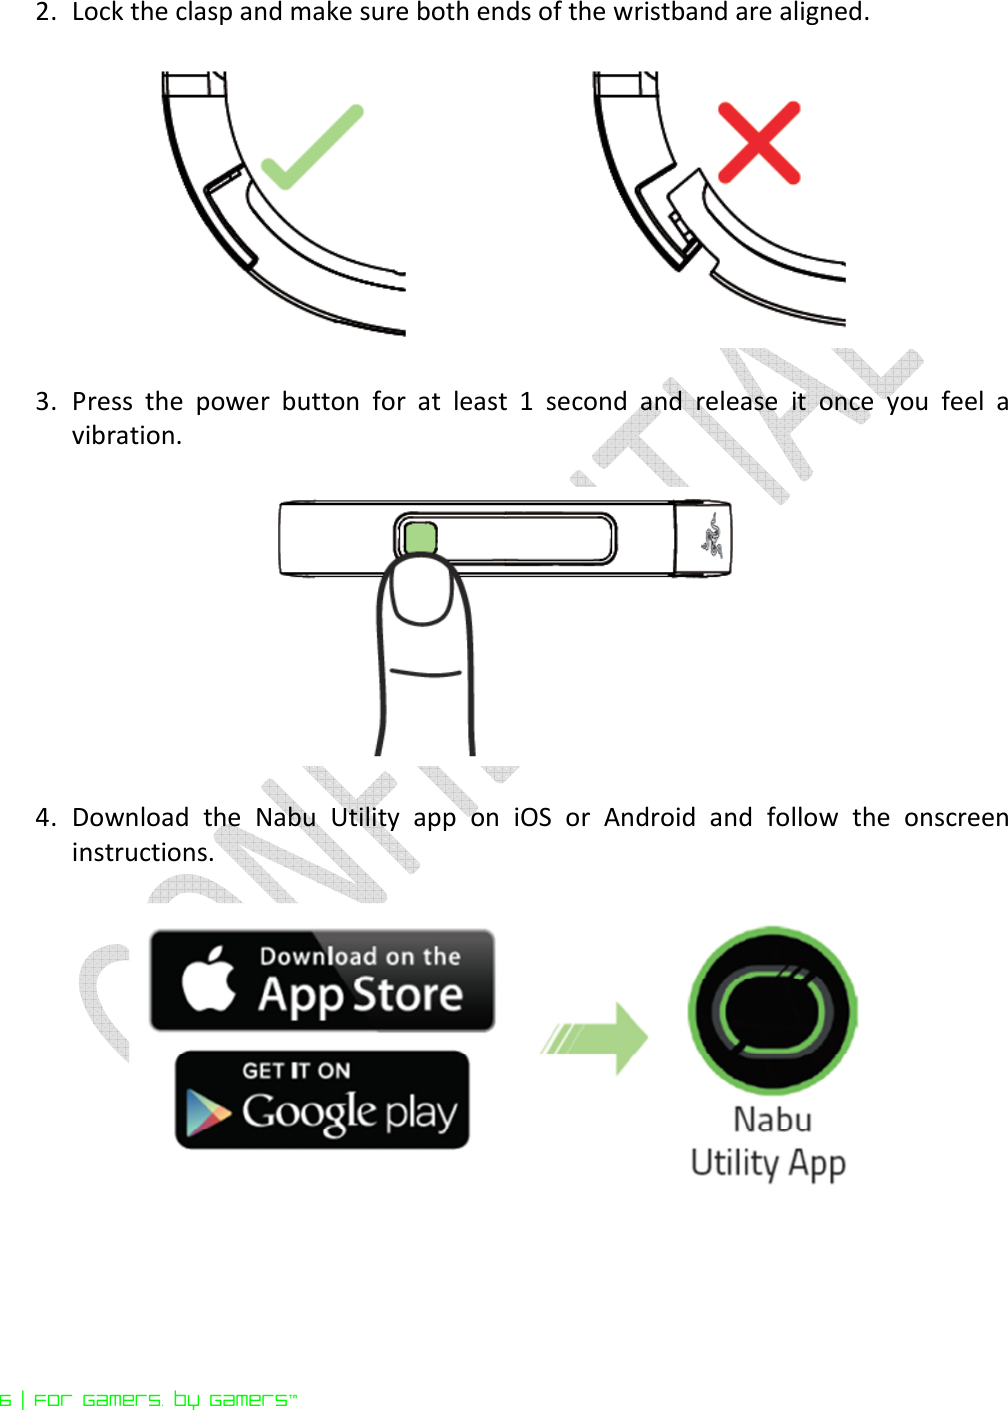  6 | For gamers. by gamers™ 2. Lock the clasp and make sure both ends of the wristband are aligned.    3. Press  the  power  button  for  at  least  1  second  and  release  it  once  you  feel  a vibration.    4. Download  the  Nabu  Utility  app  on  iOS  or  Android  and  follow  the  onscreen instructions.      